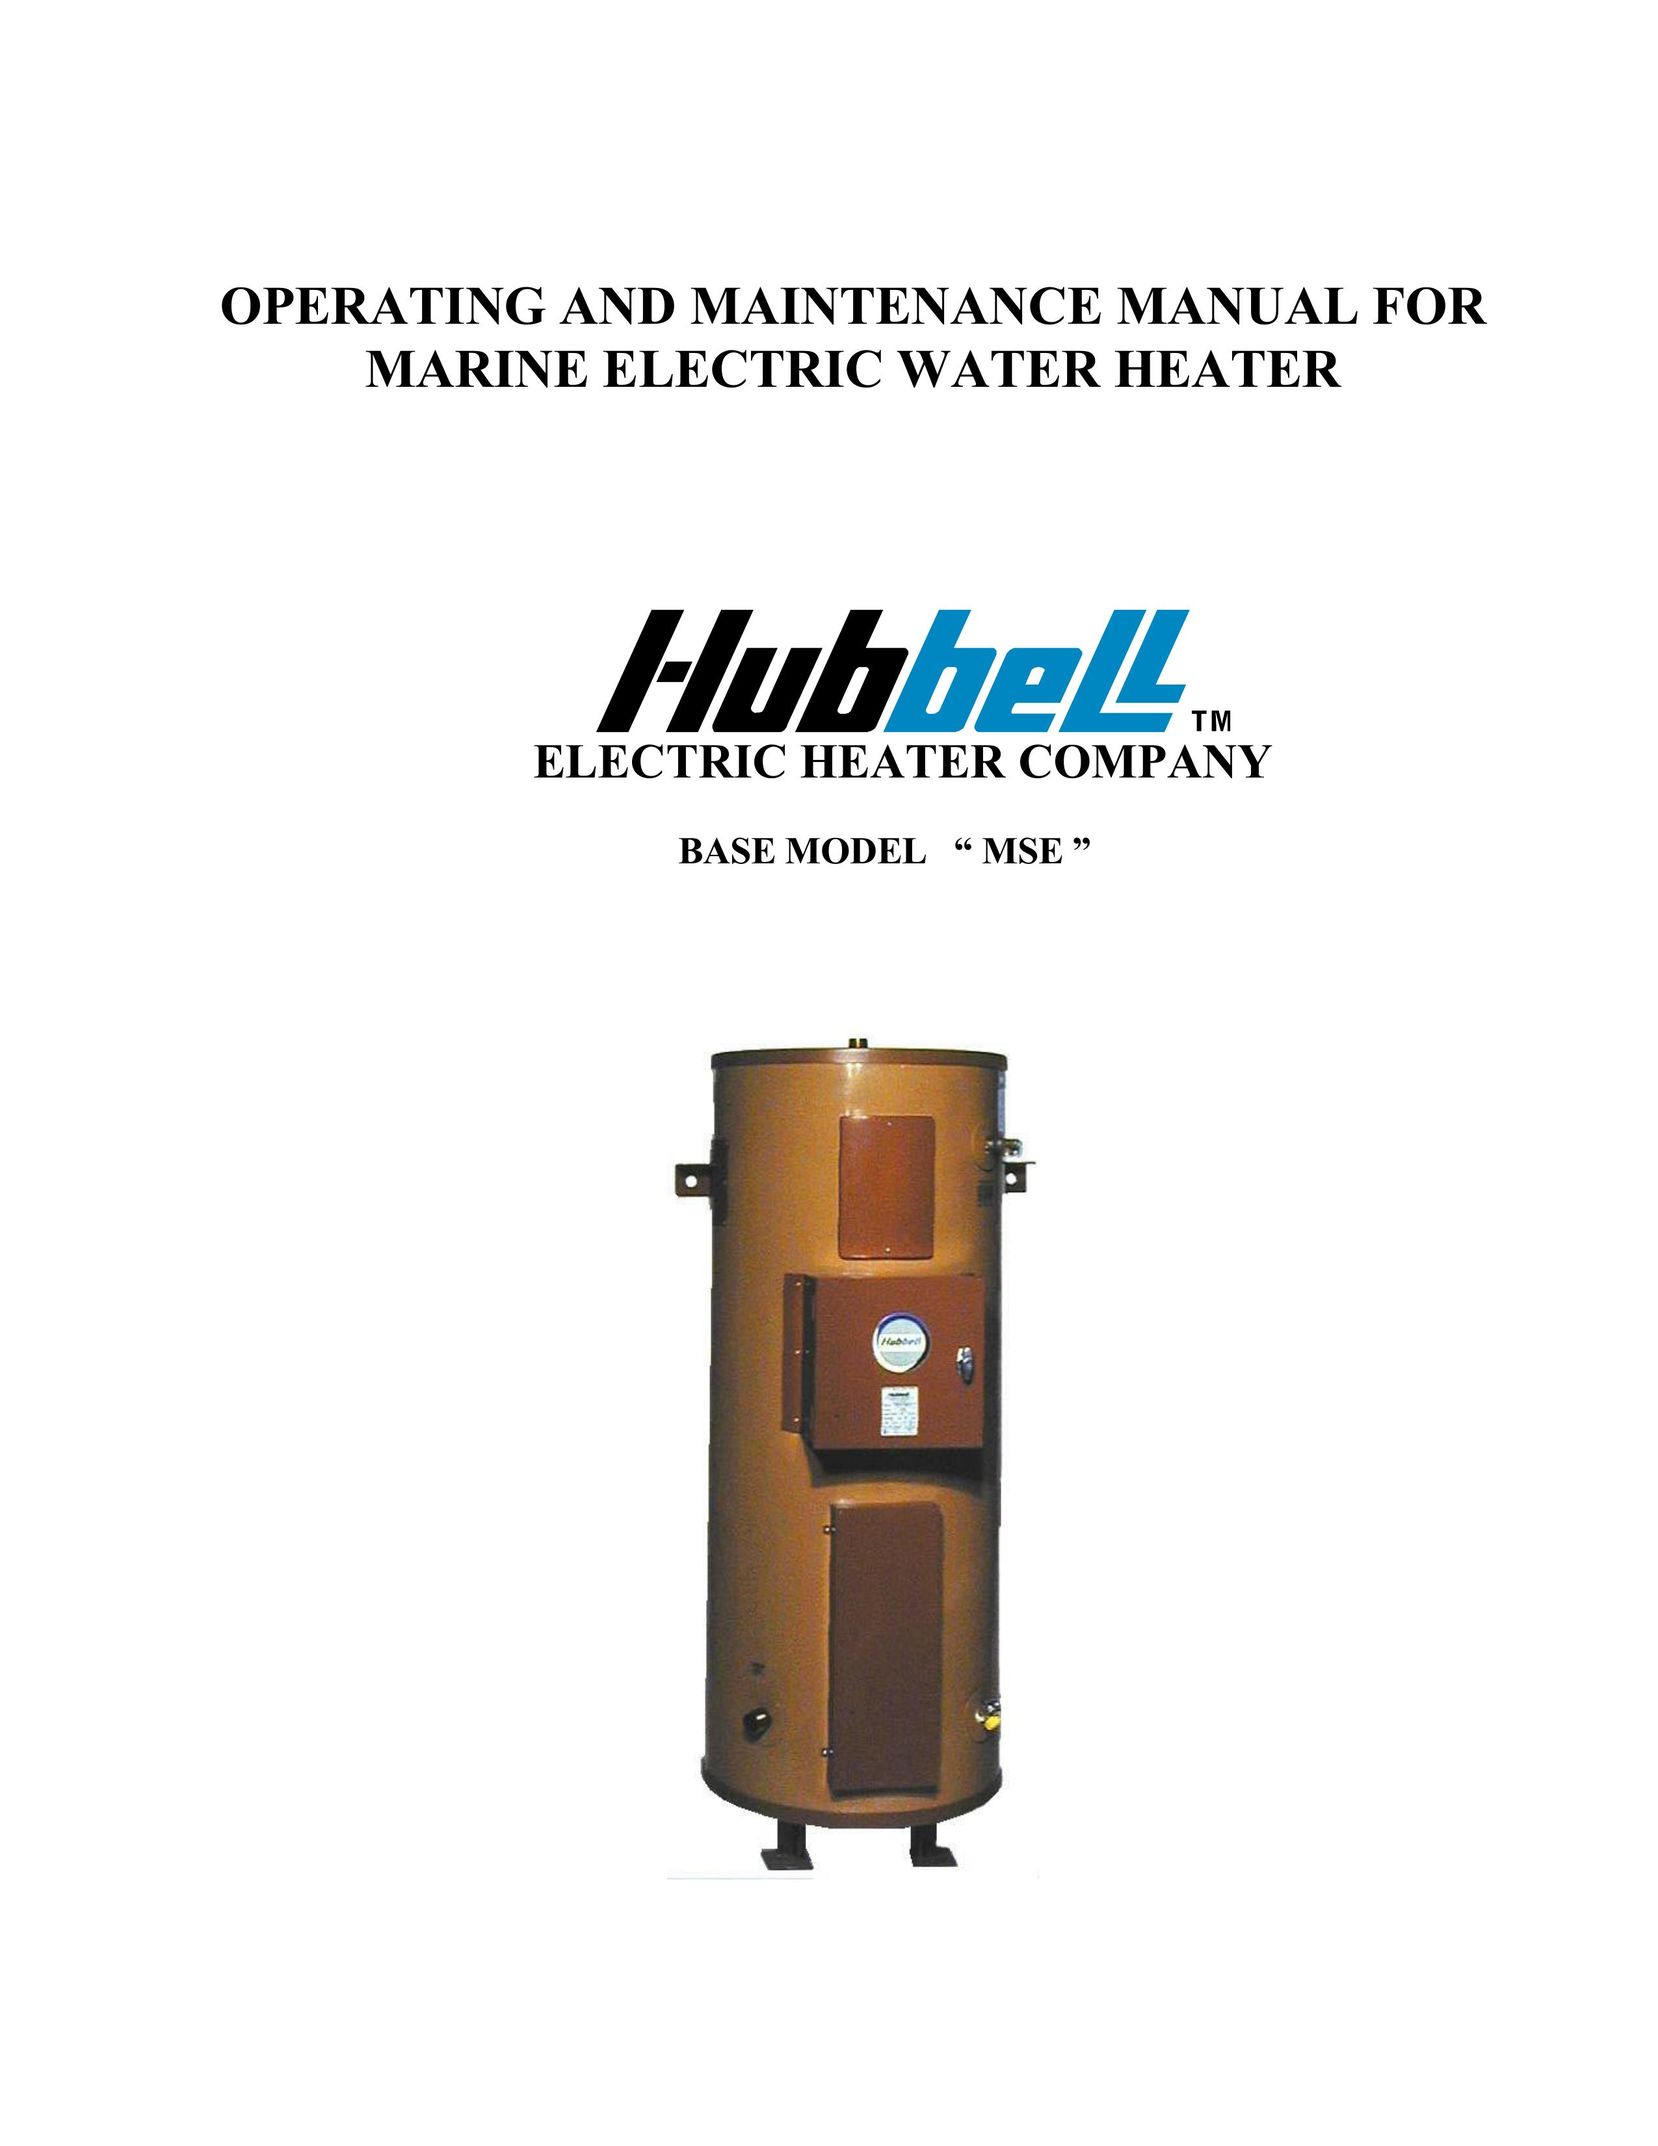 Hubbell Electric Heater Company MSE Water Heater User Manual